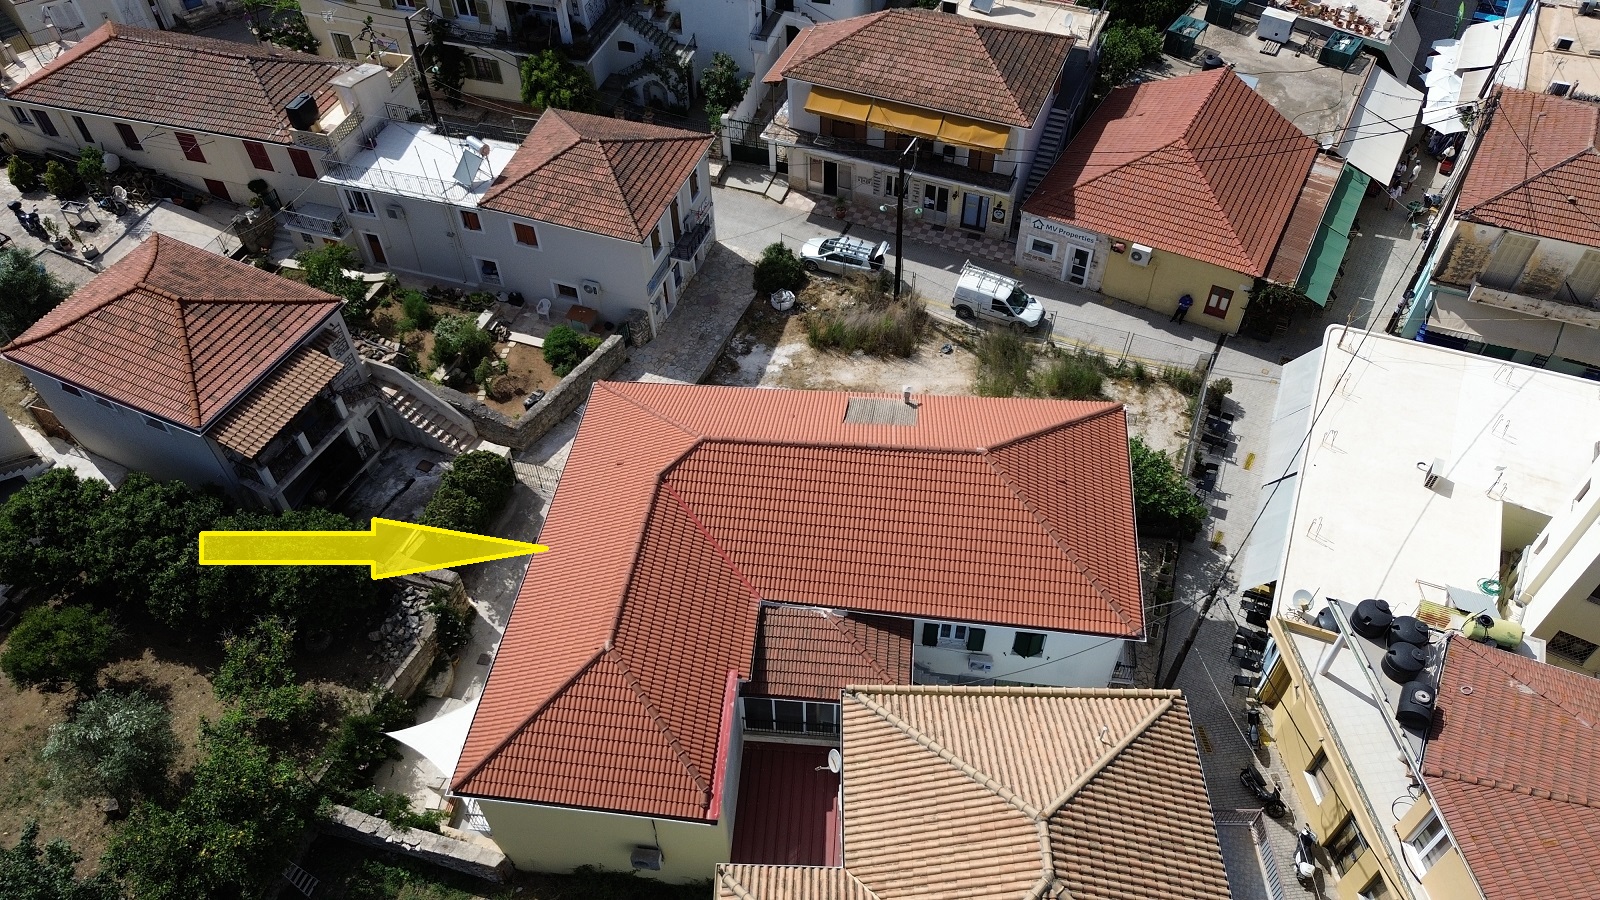 Aerial views and location of house for sale in Ithaca Greece Vathi